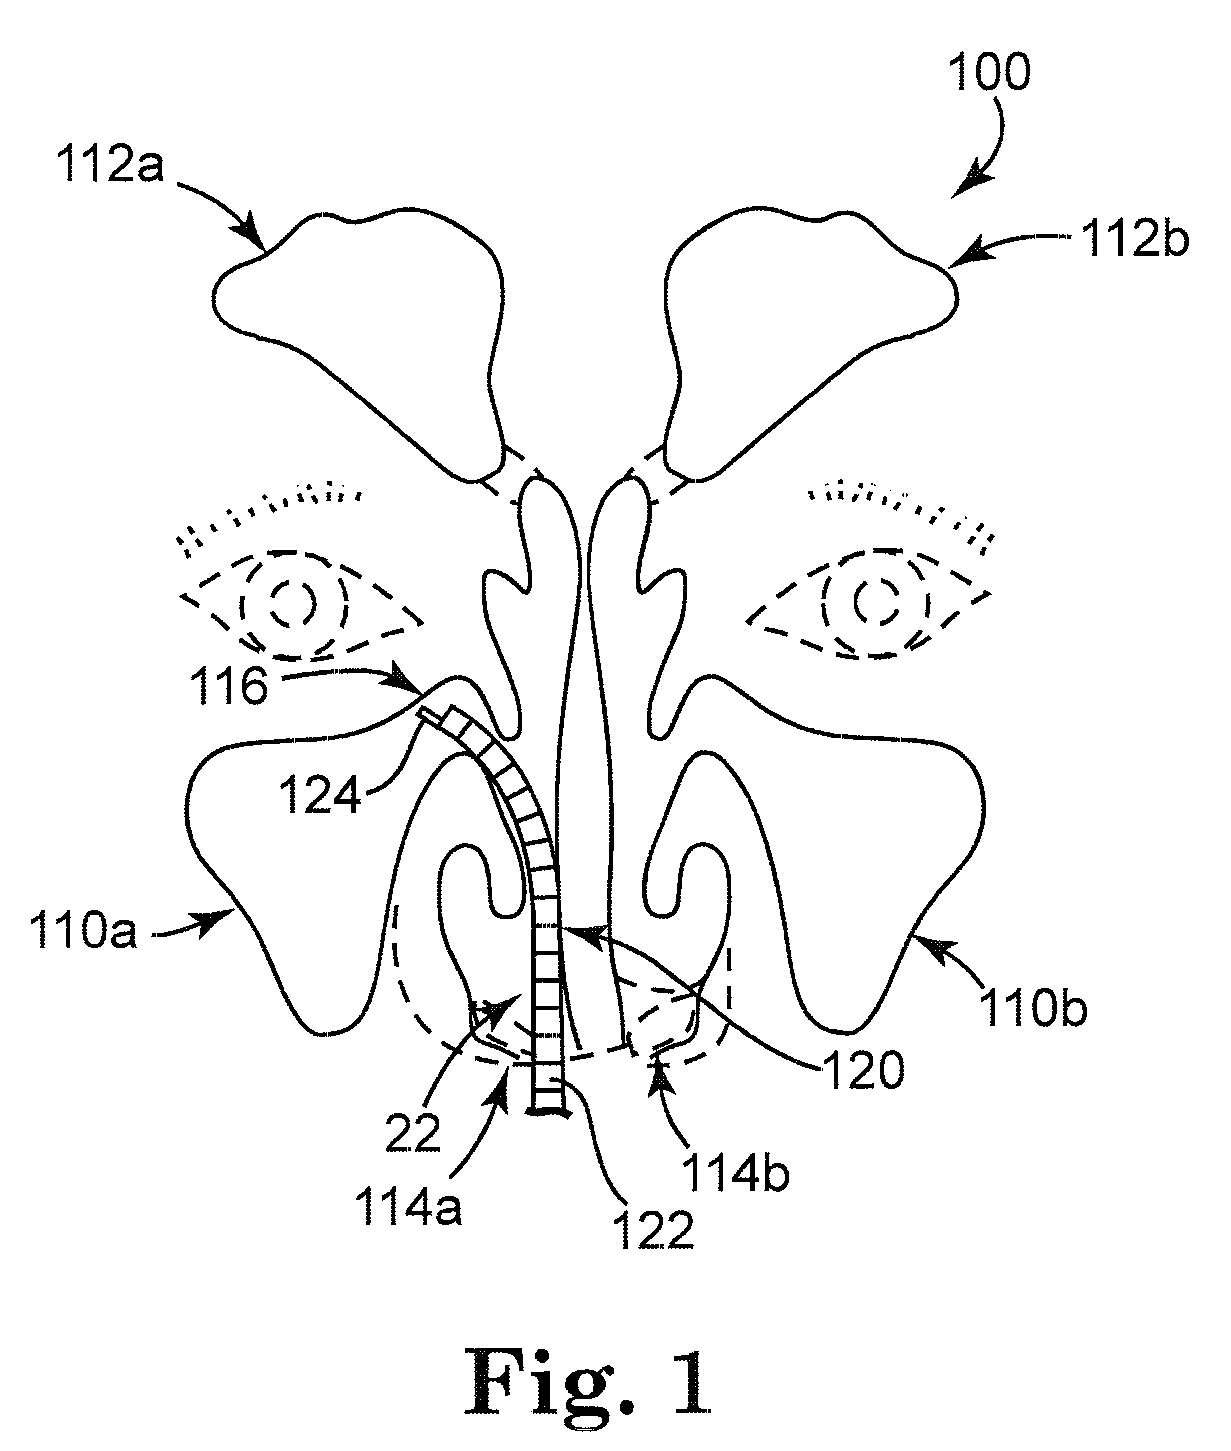 Solvating system and sealant for medical use in the sinuses and nasal passages